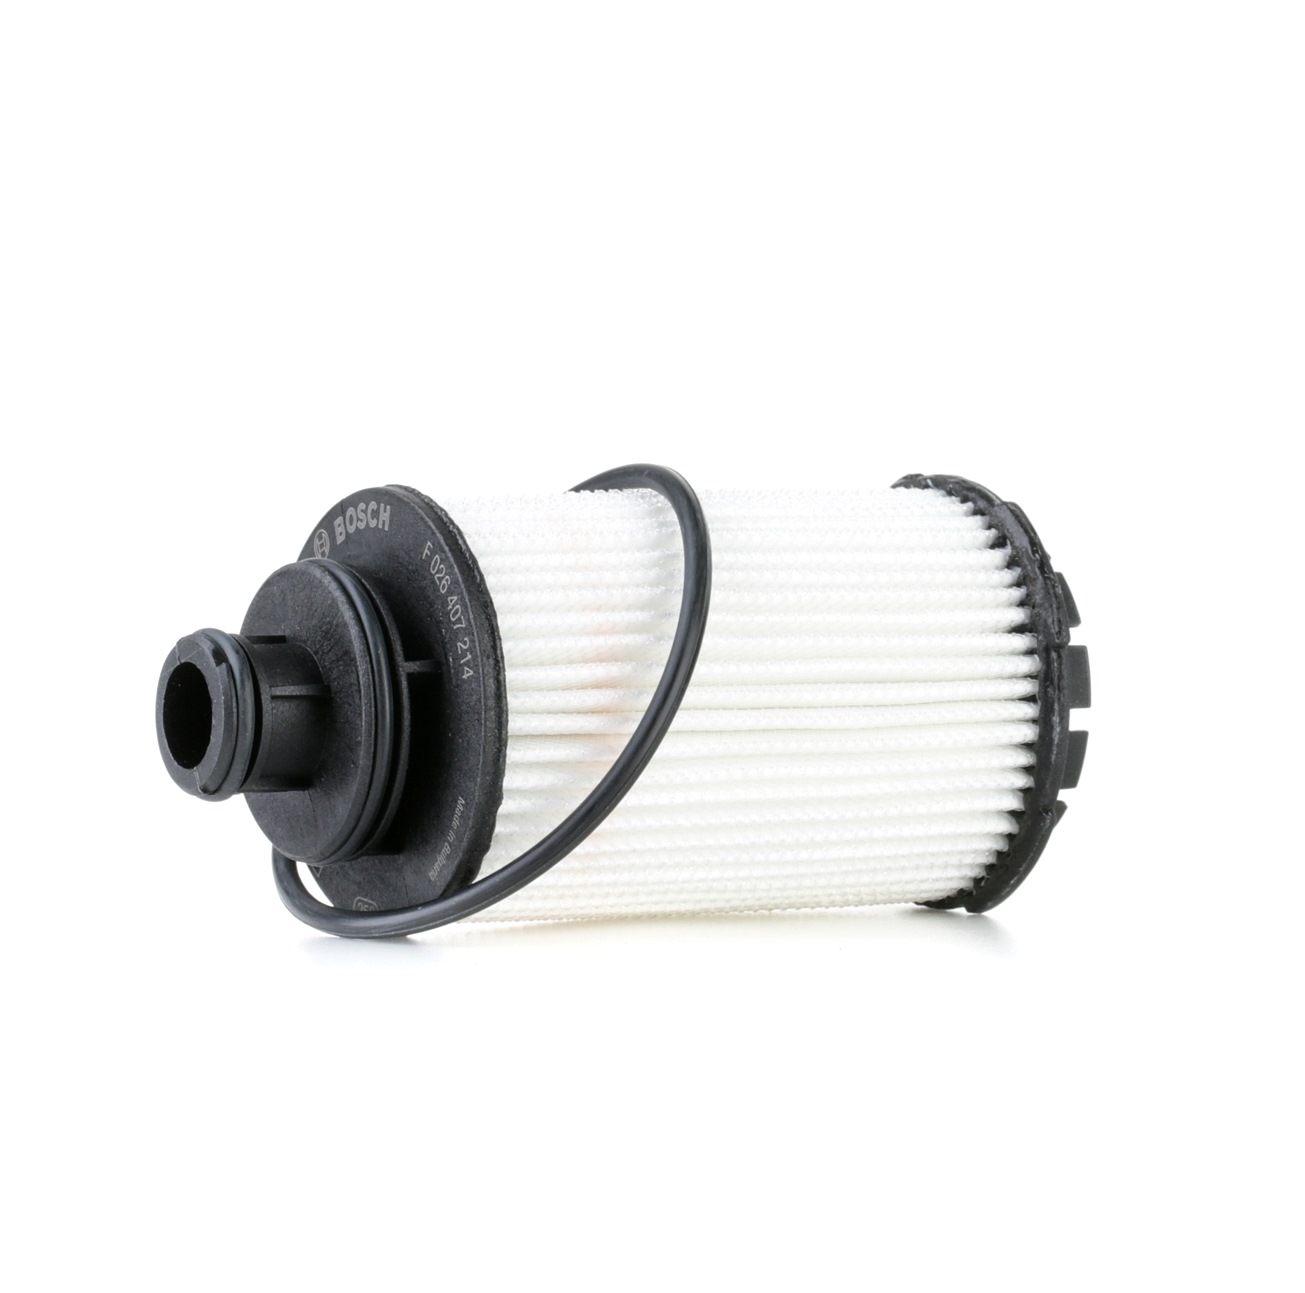 Oil filter BOSCH F 026 407 214 - Opel Insignia B Country Tourer (Z18) Filter spare parts order